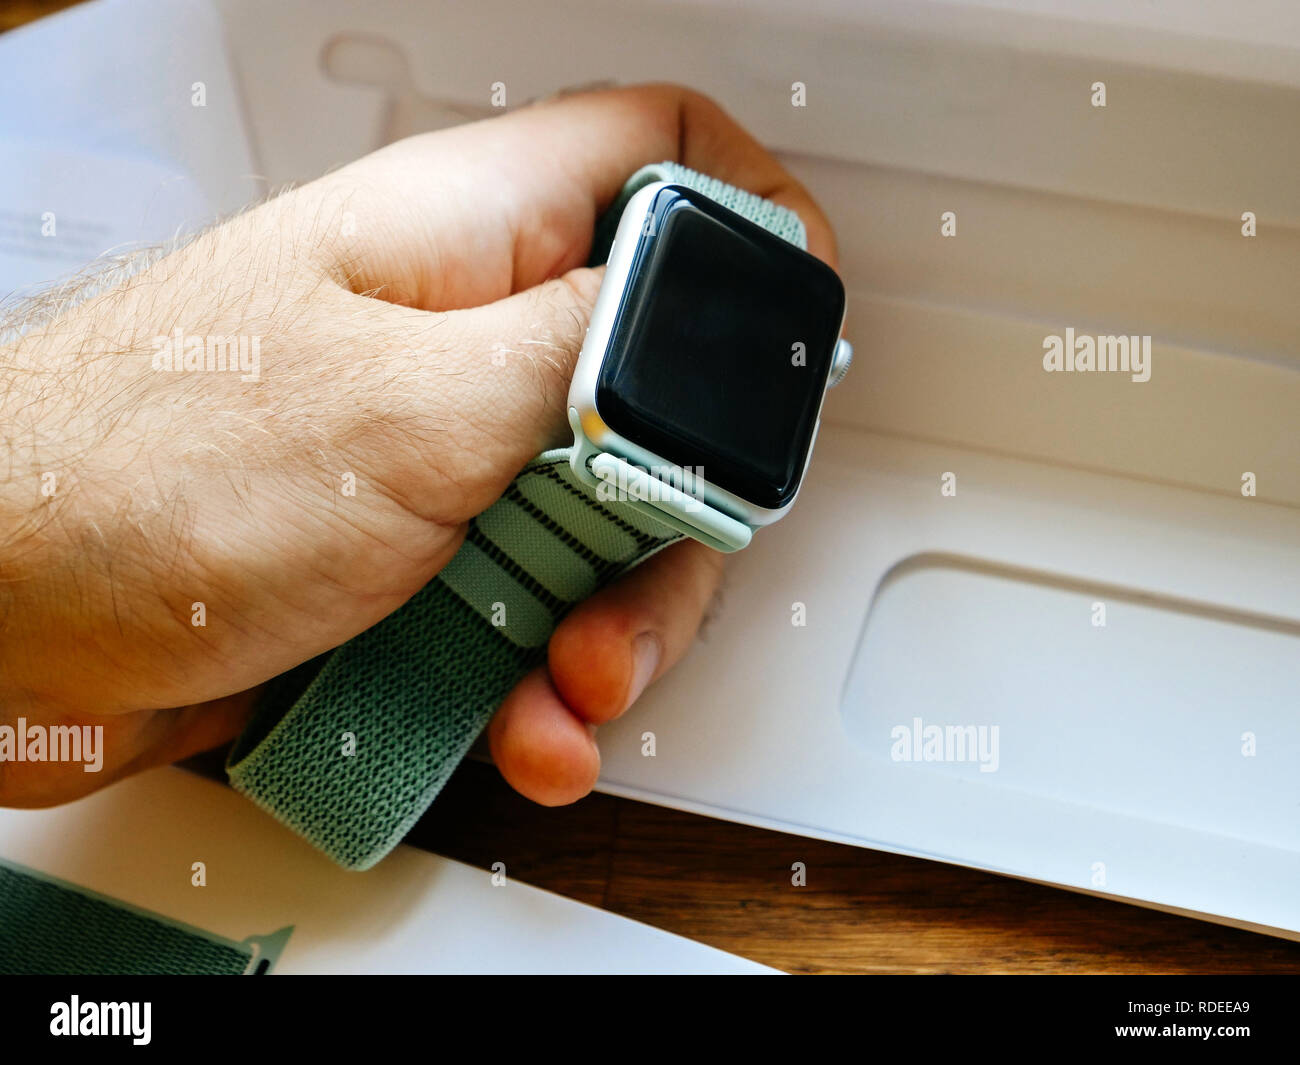 PARIS, FRANCE - APR 24, 2018: New Apple Watch Series 3 smartwatch personal  wearable device in male hand with the new 42mm Marine Green Sport Loop -  unboxing of strap Stock Photo - Alamy